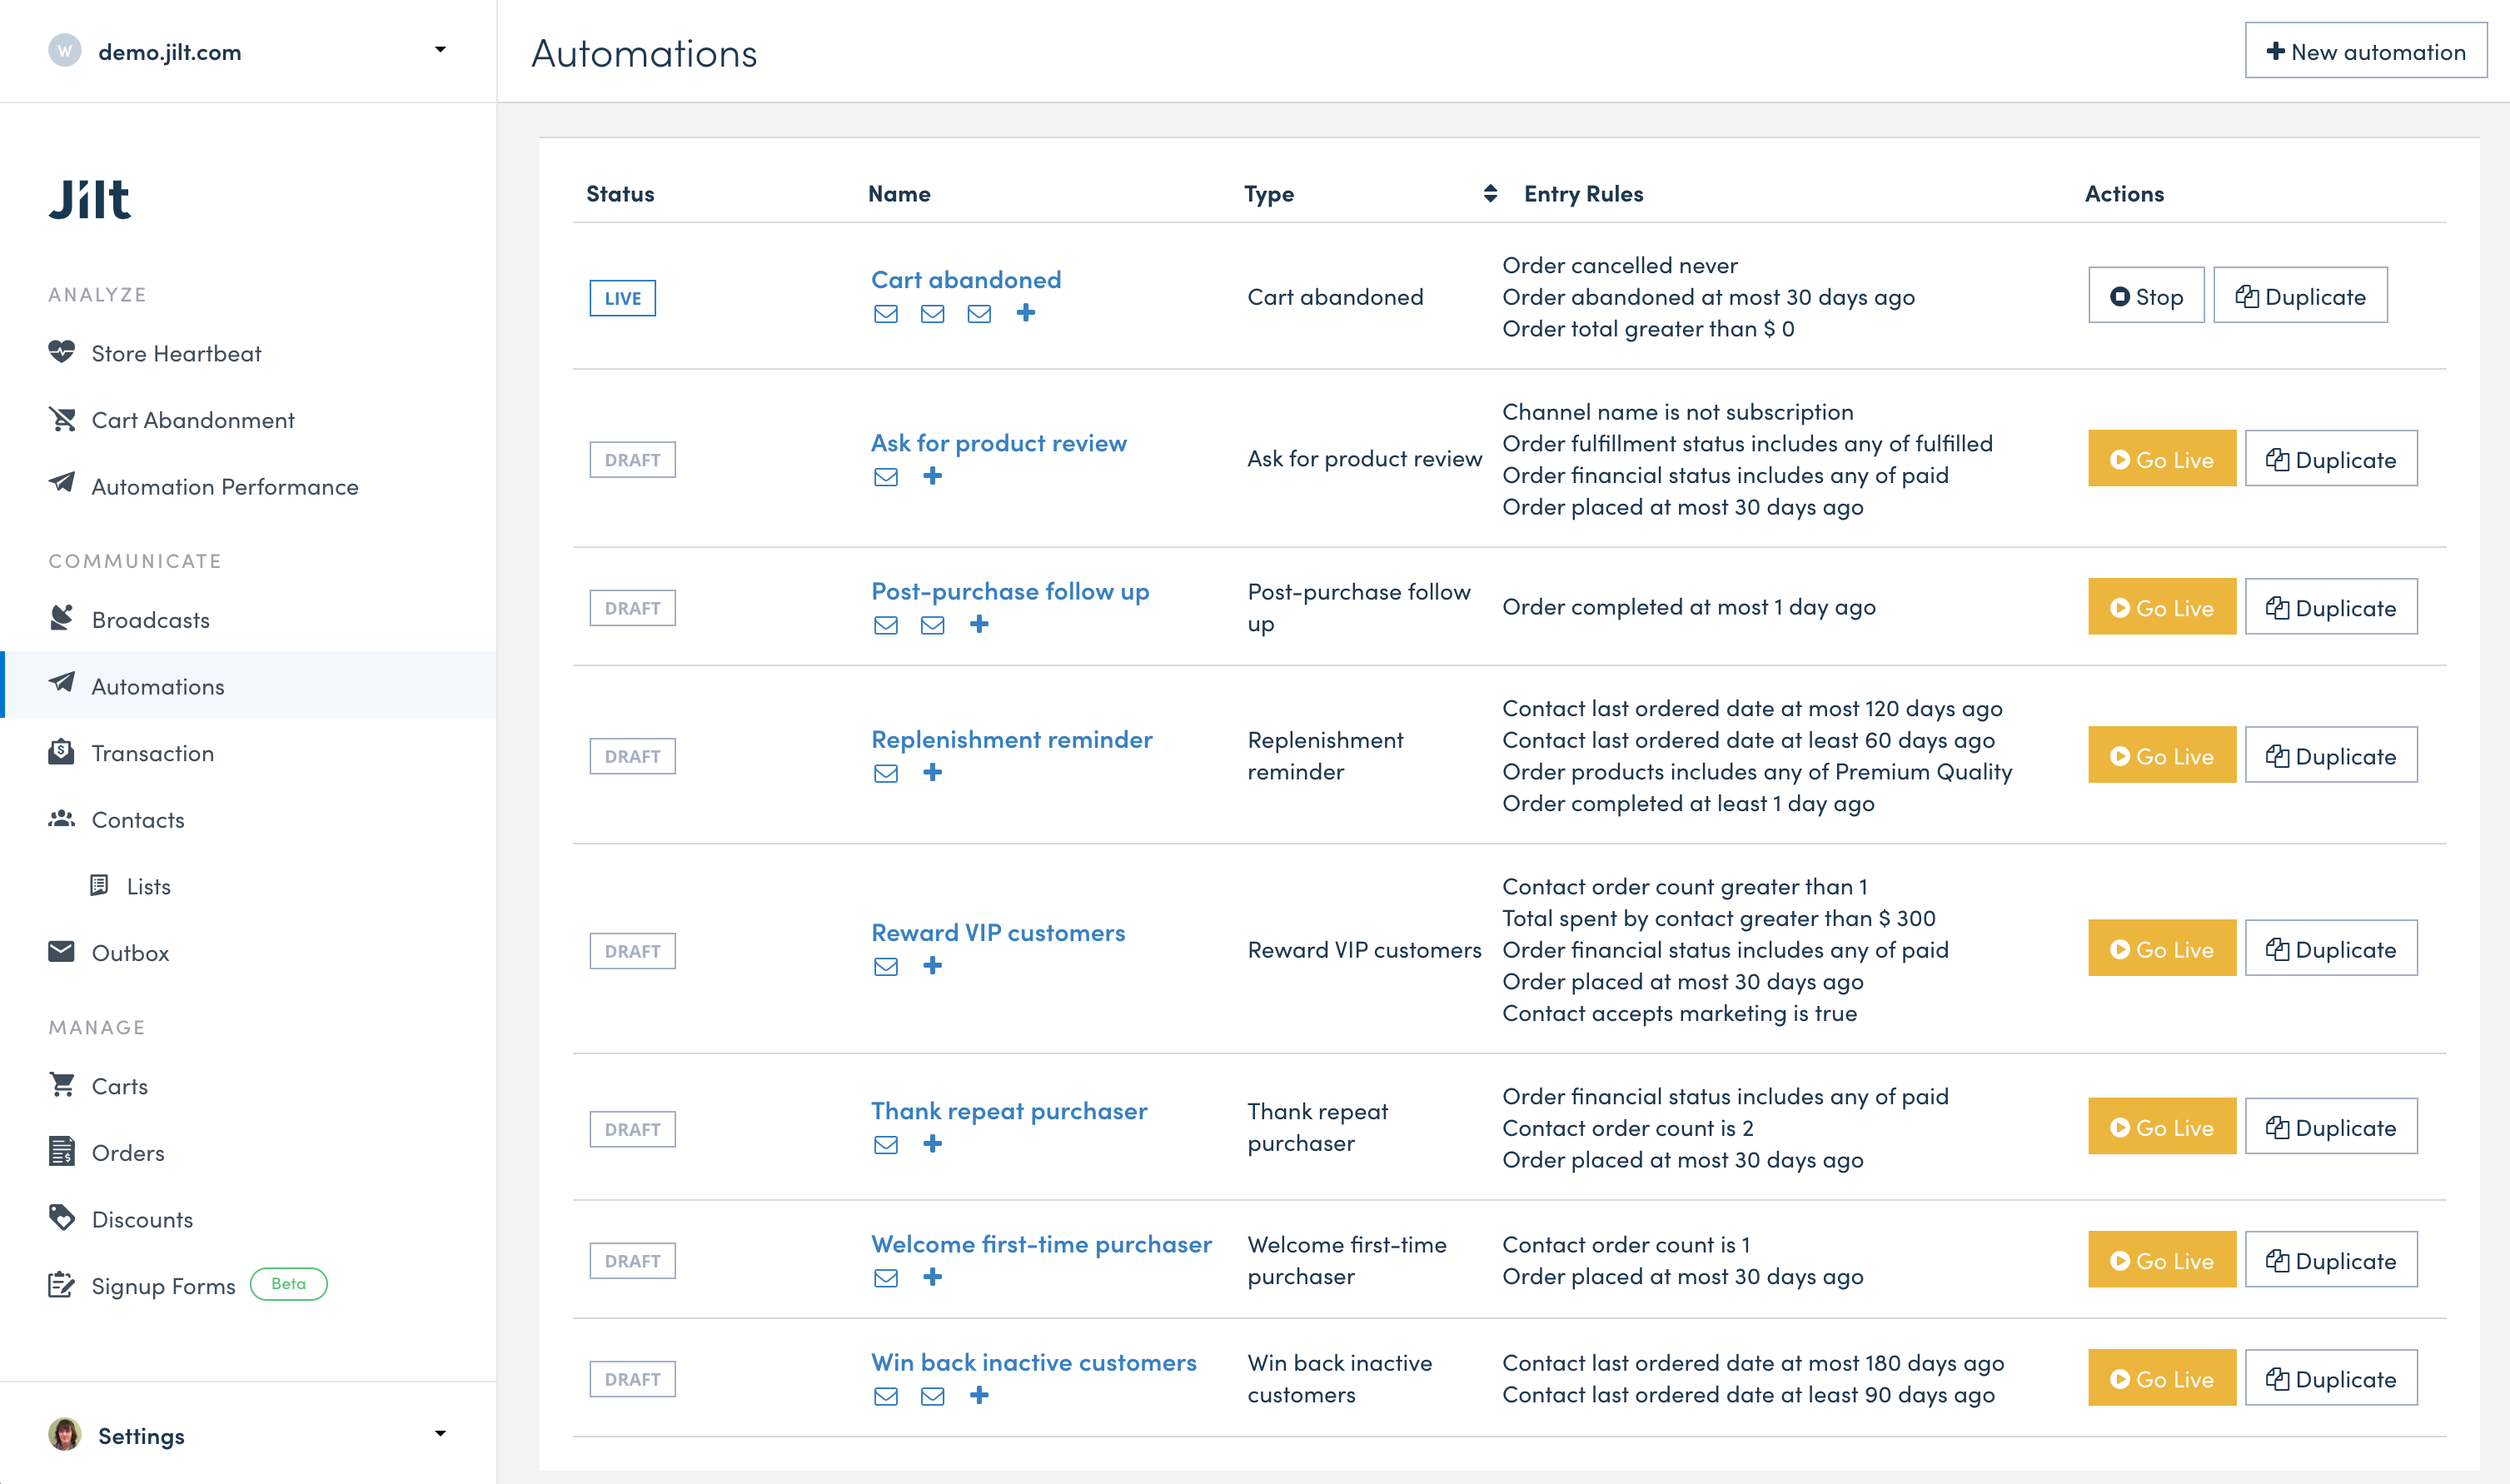 Set up your automations in Jilt to start increasing sales!